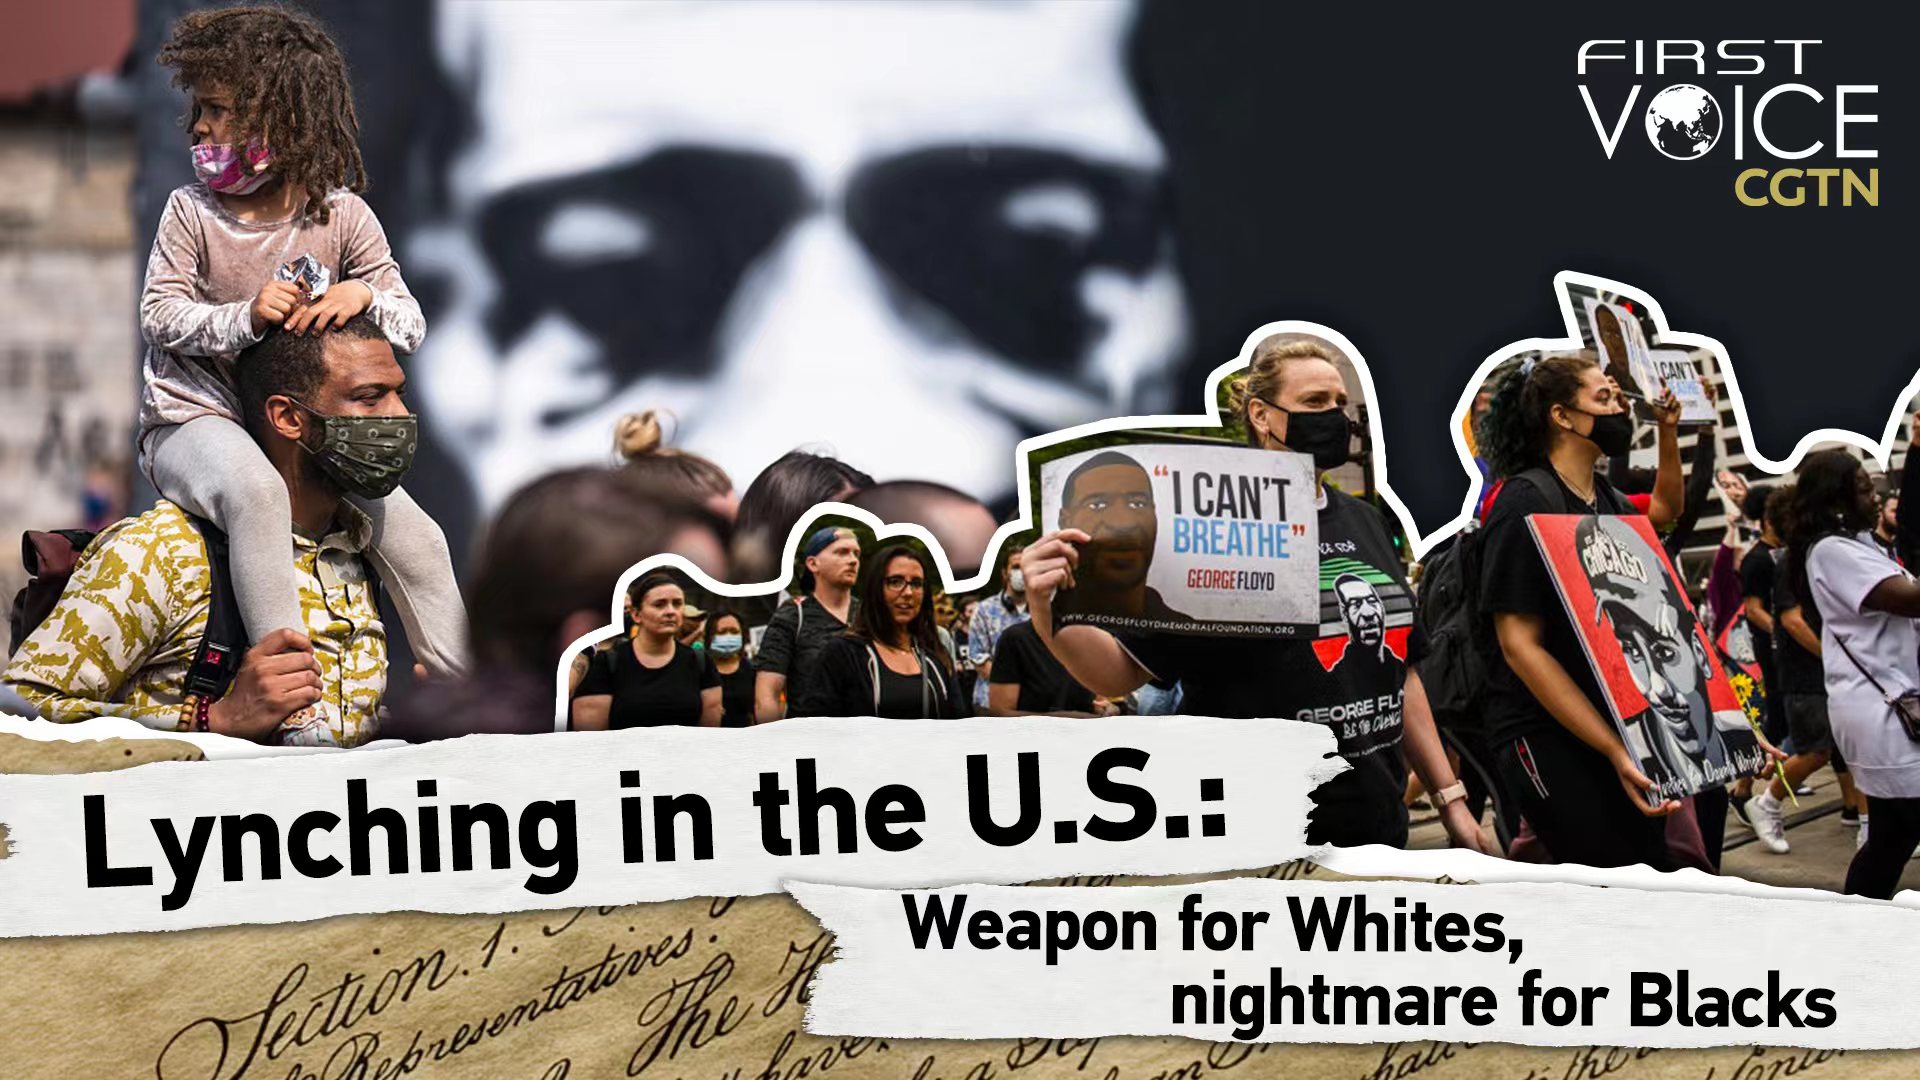 Lynching in the U.S.: Weapon for Whites, nightmare for Blacks